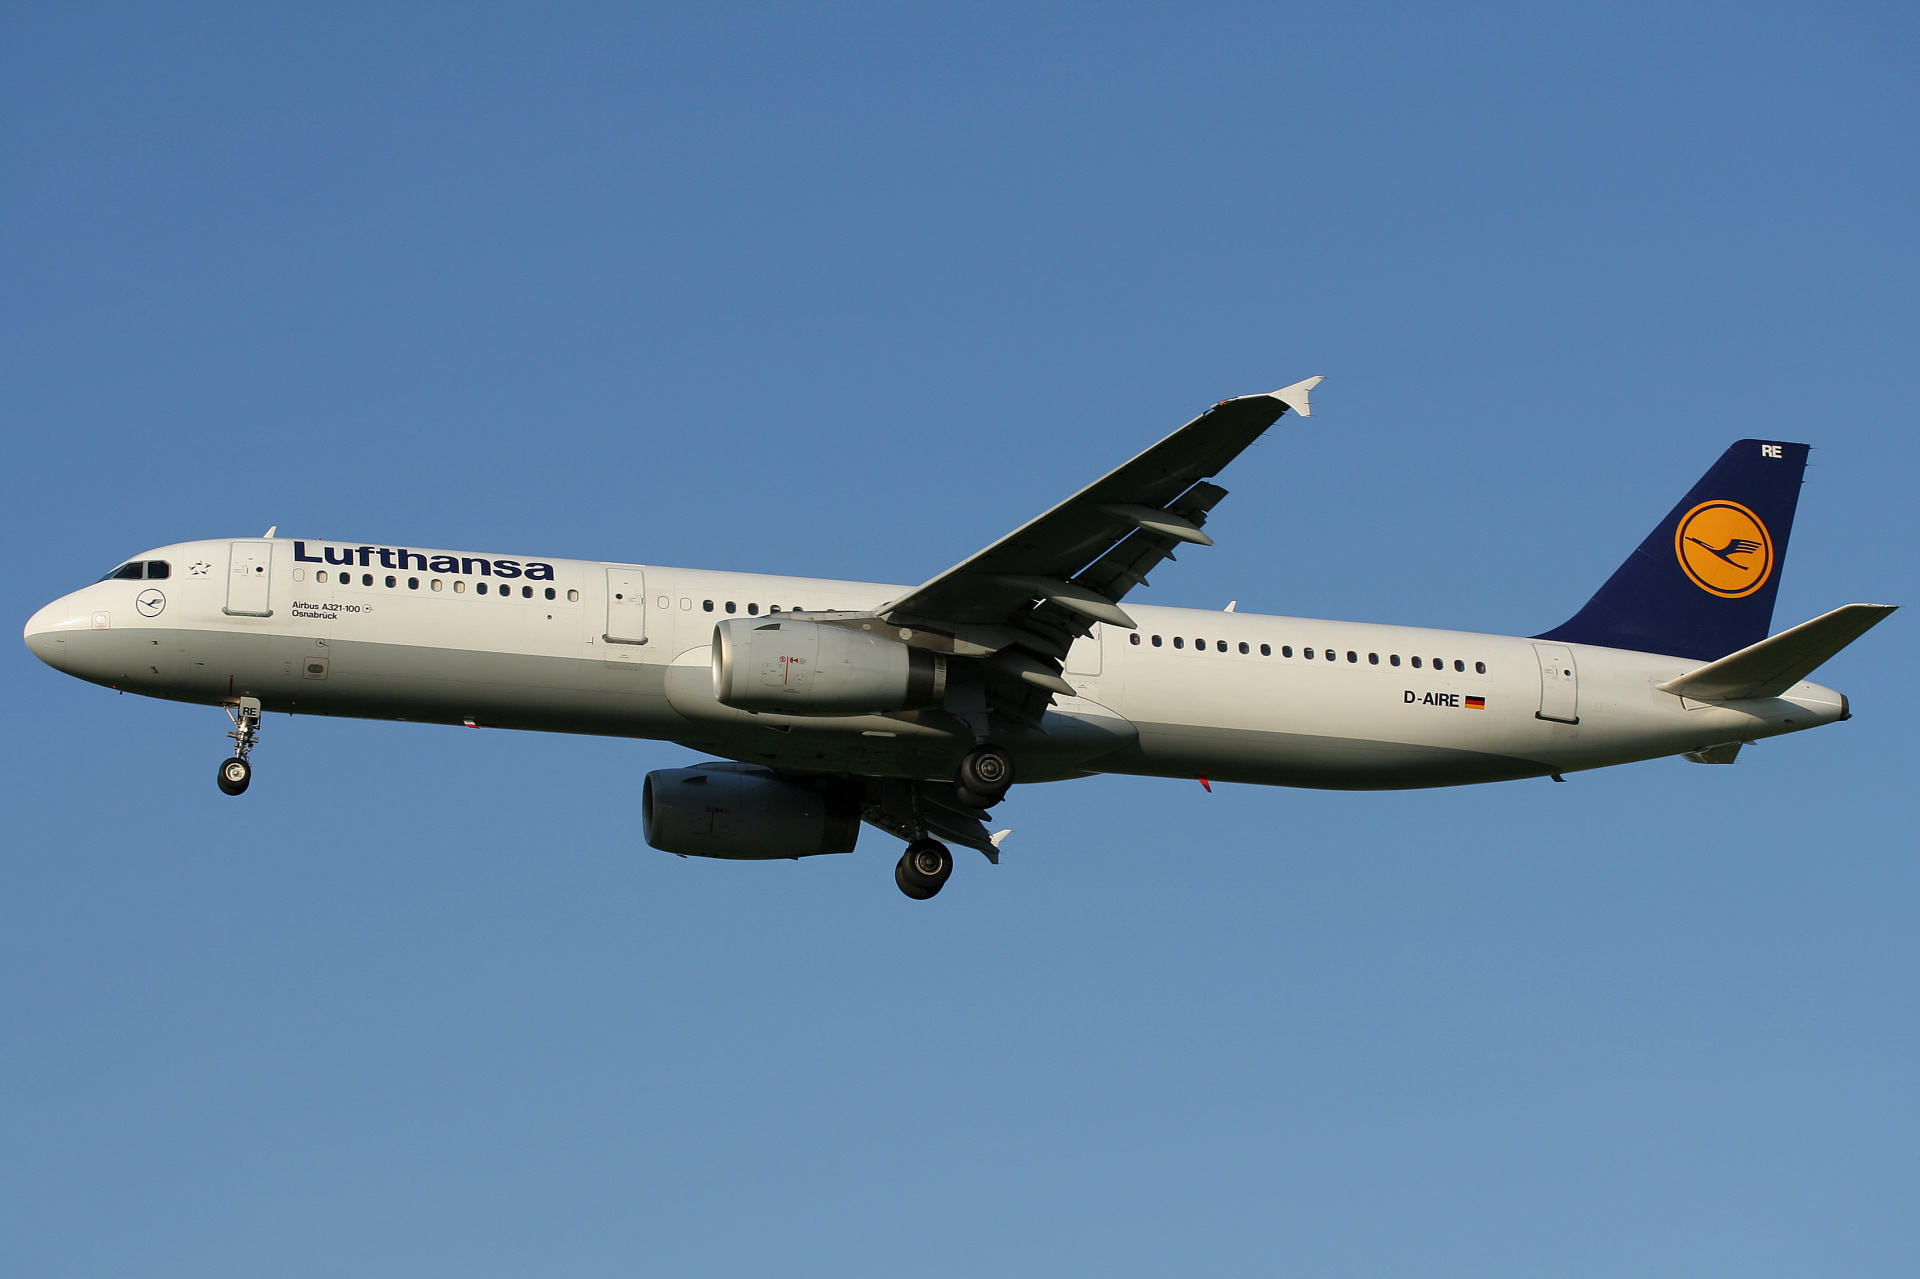 D-AIRE (Aircraft » EPWA Spotting » Airbus A321-100 » Lufthansa)